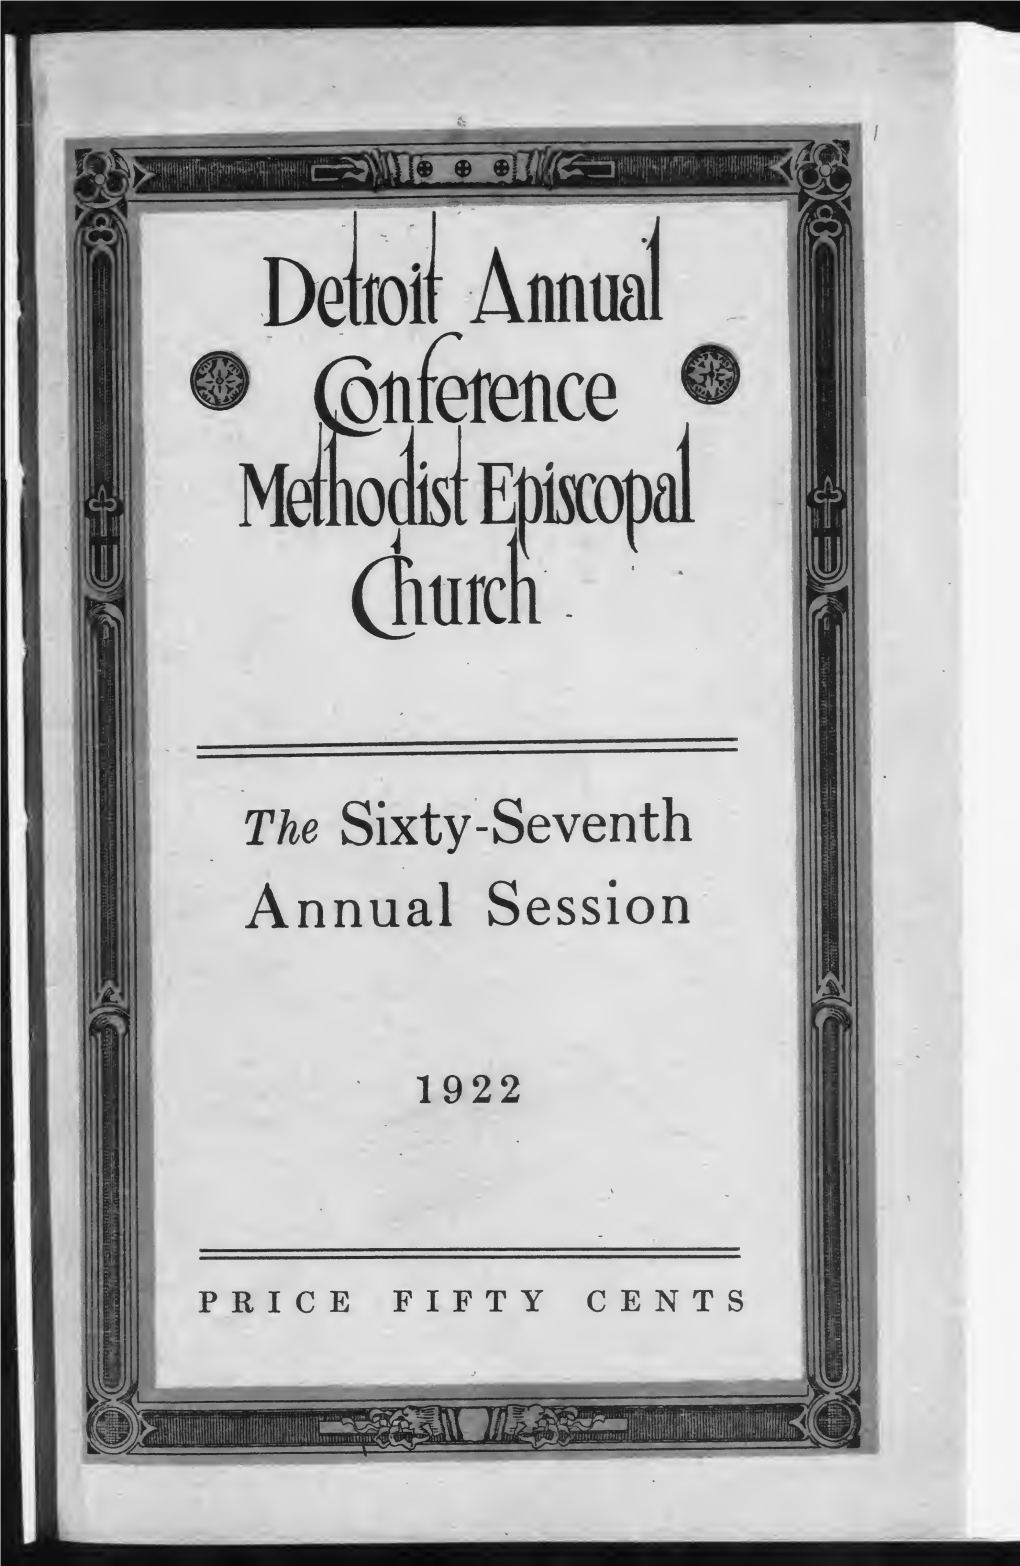 Session of the Detroit Annual Conference of The